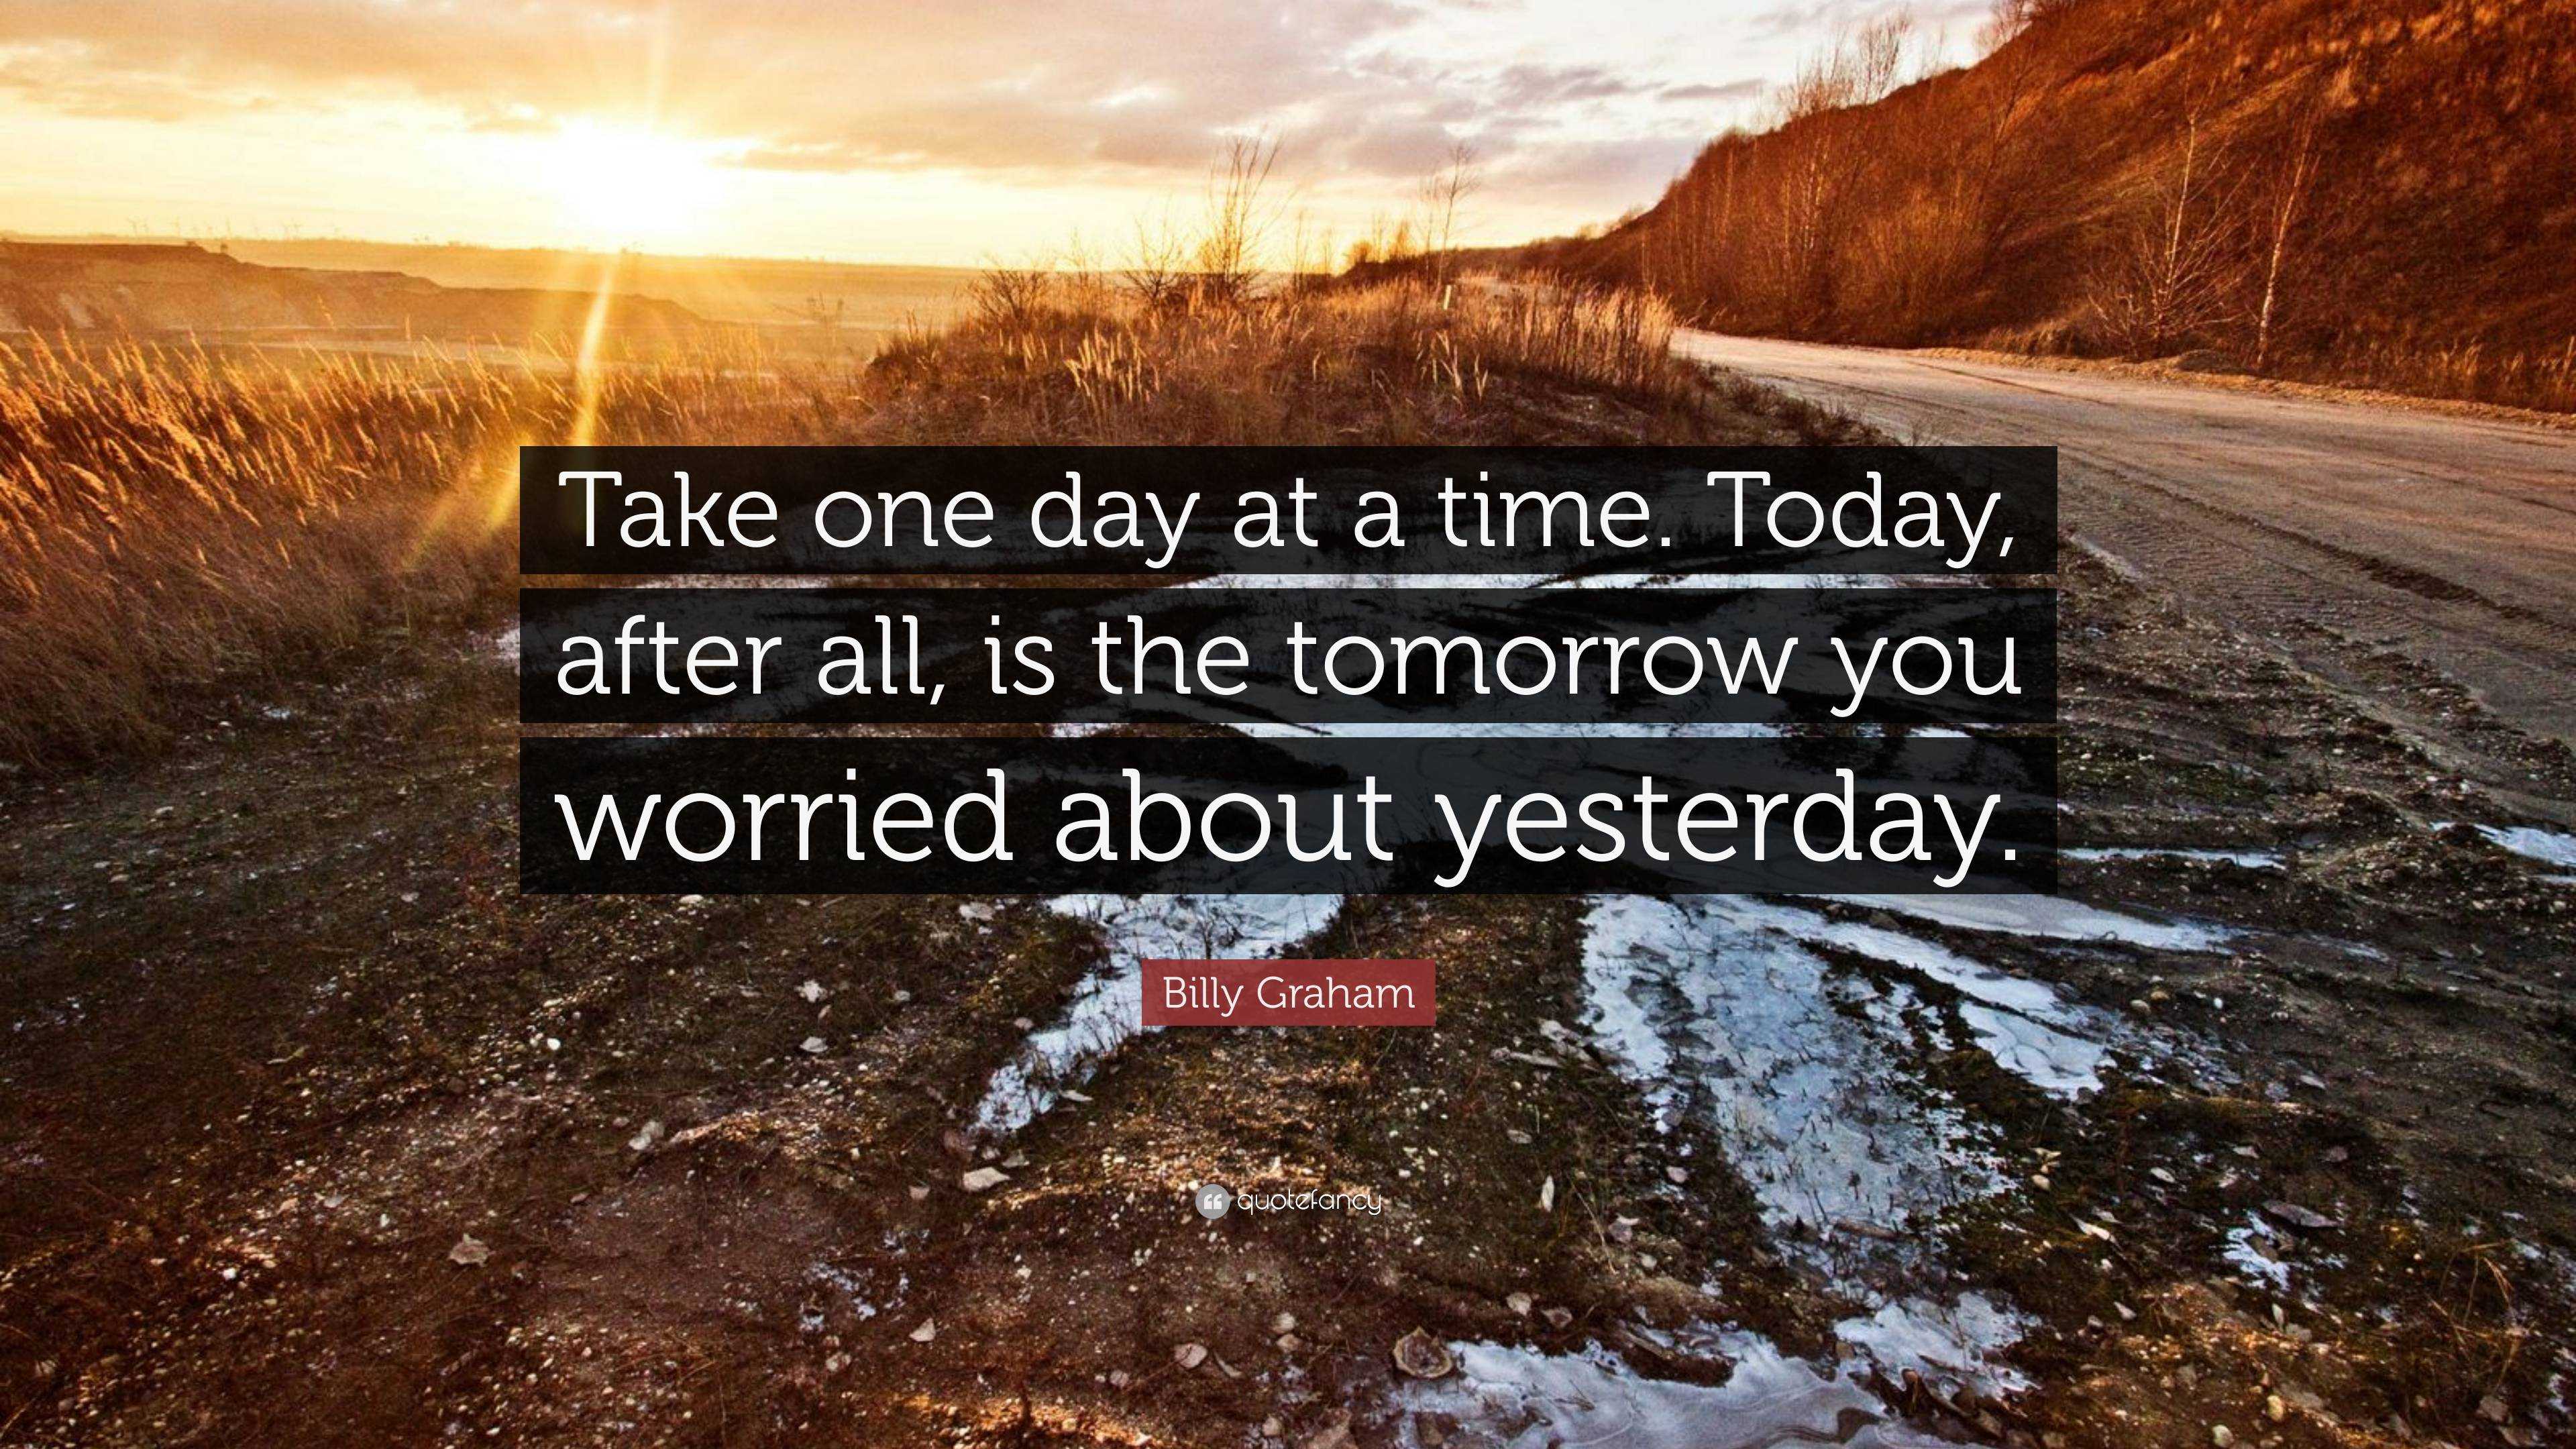 Billy Graham Quote: “Take one day at a time. Today, after all, is the  tomorrow you